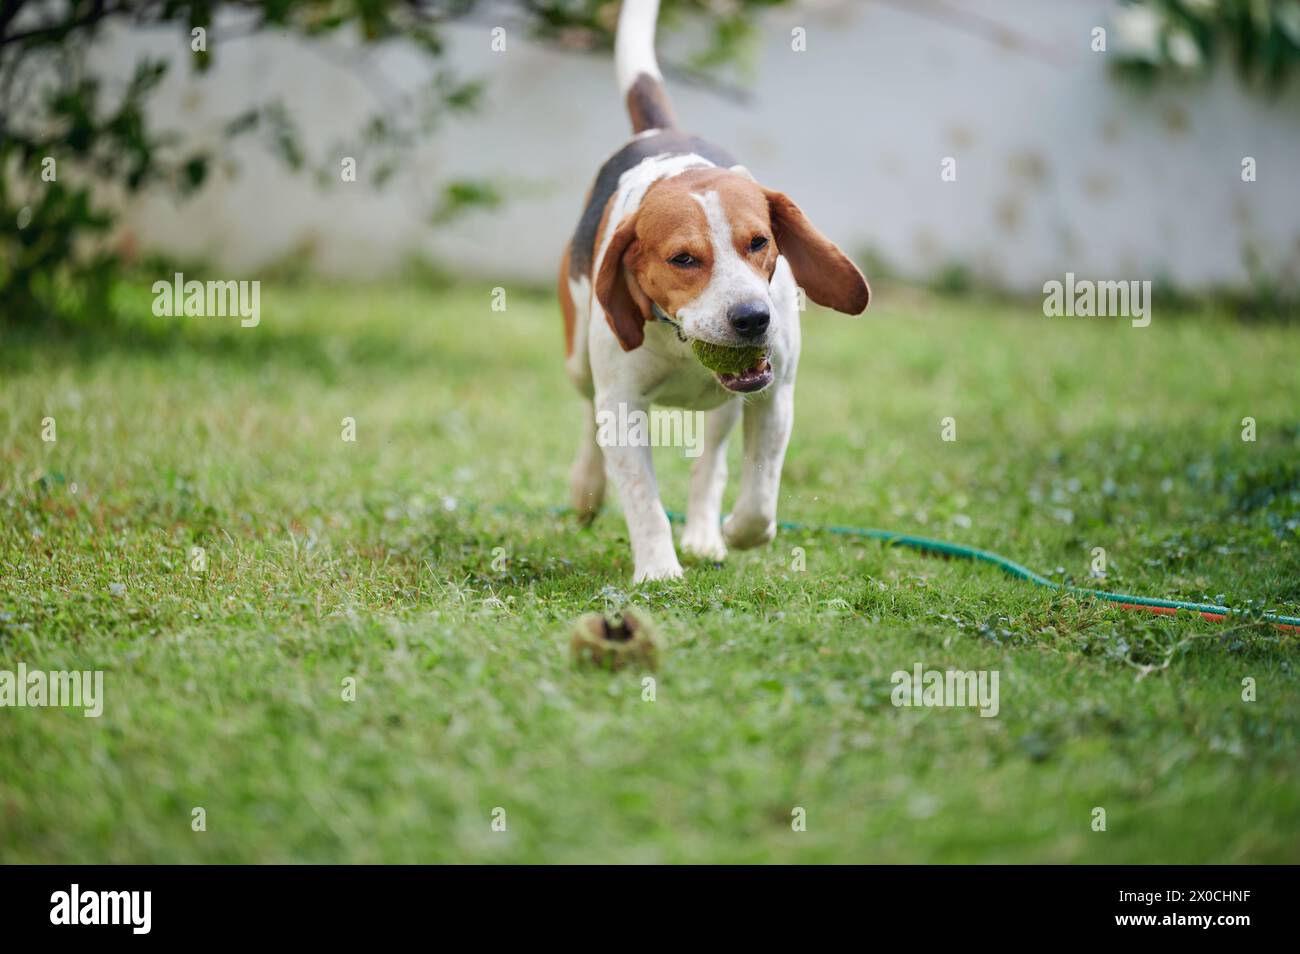 Fast running beagle dog while playing in green grass Stock Photo